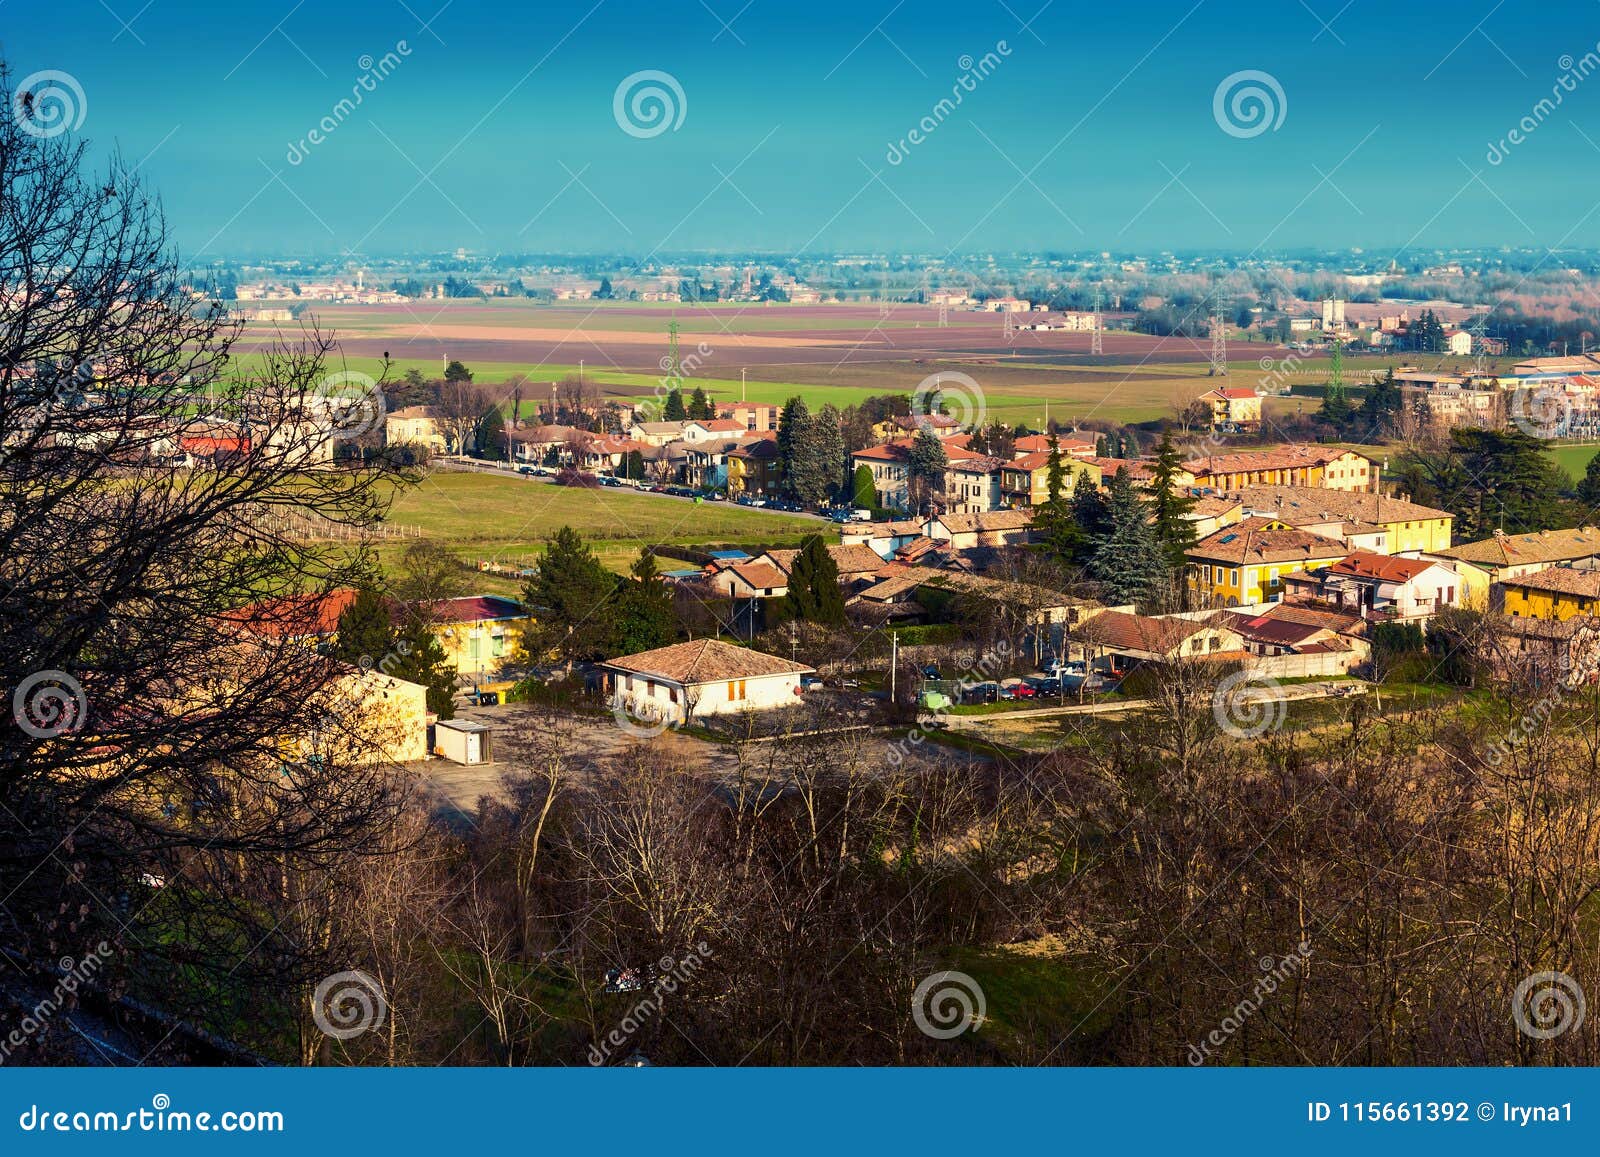 Rural Landscape in Emilia-Romagna, Italy Editorial Photography Image of field, agriculture: 115661392